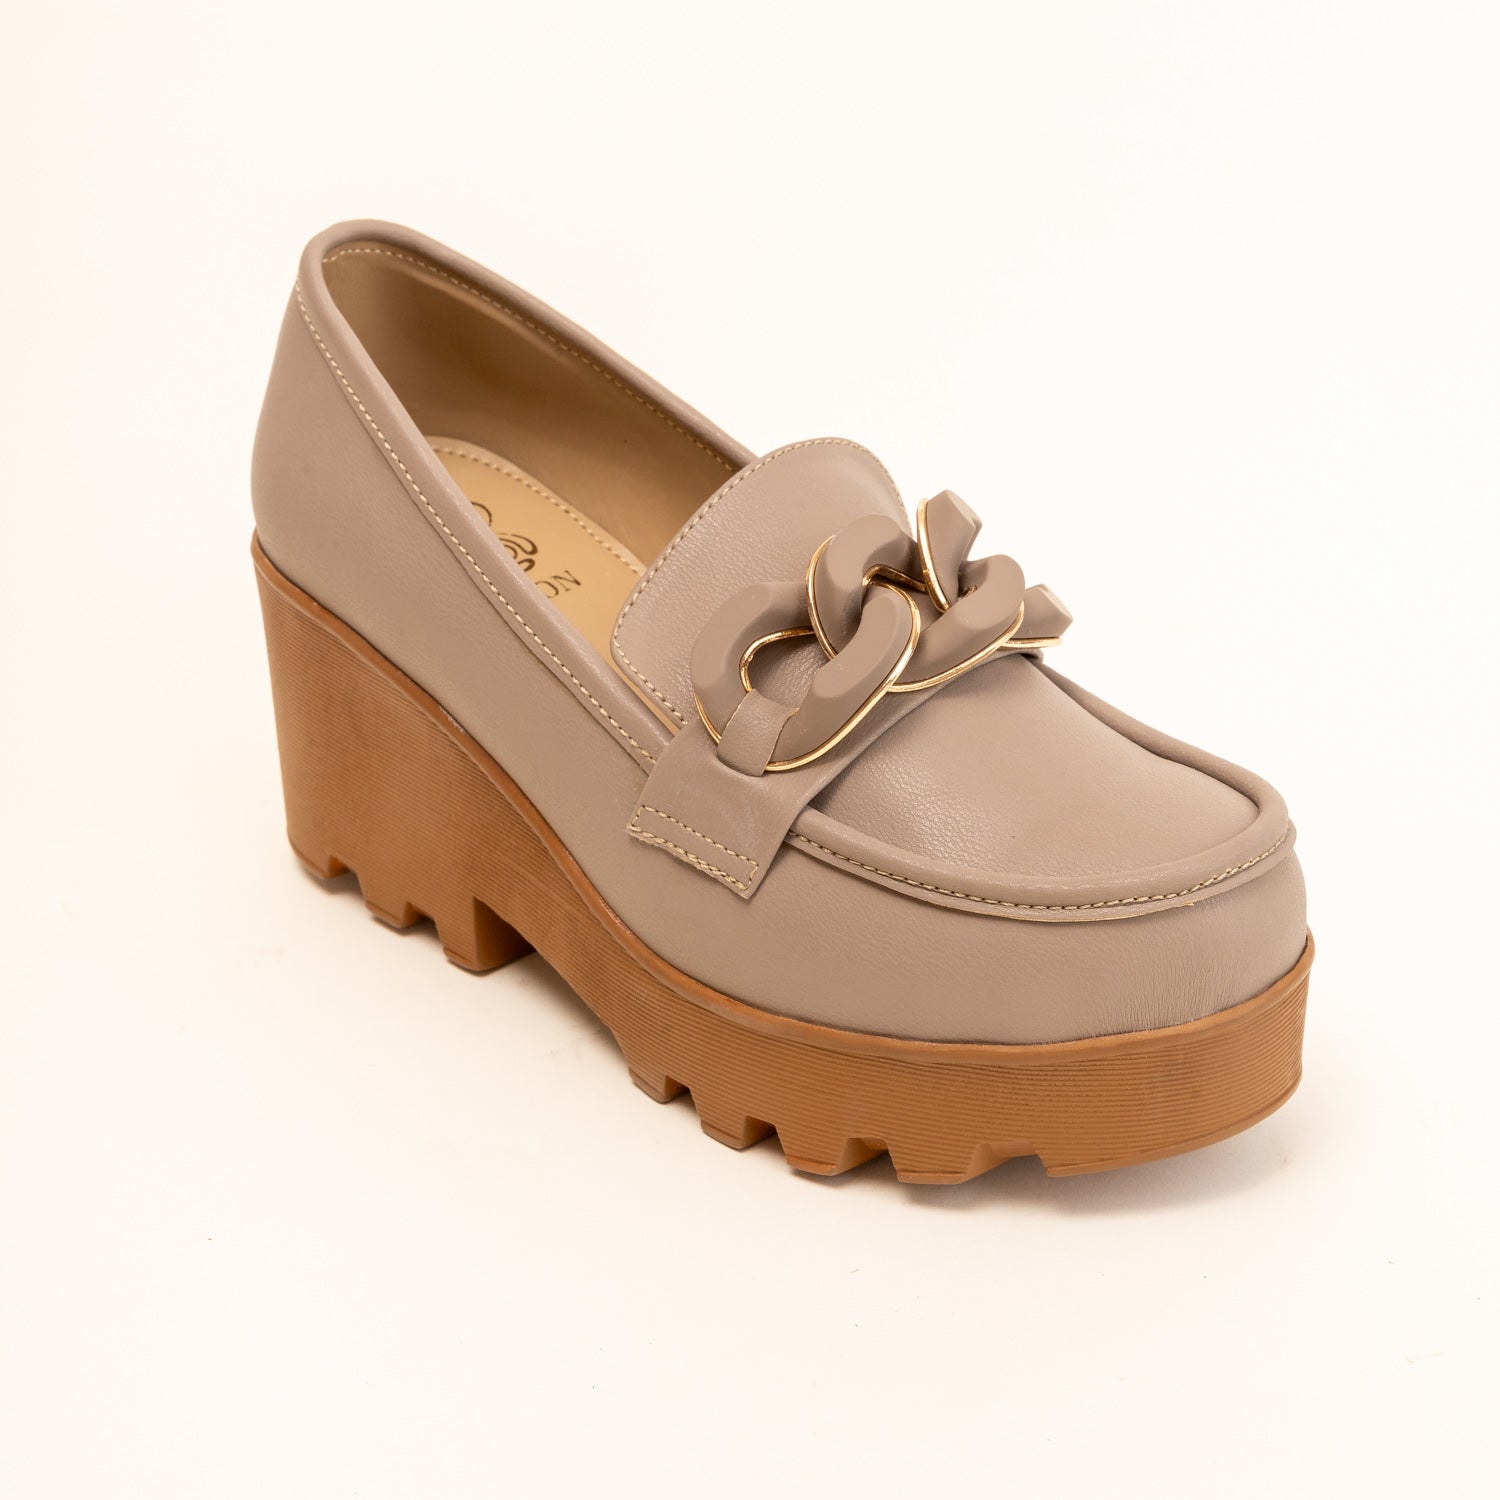 COCO MELT-Chunky shoe in Chiku colour.